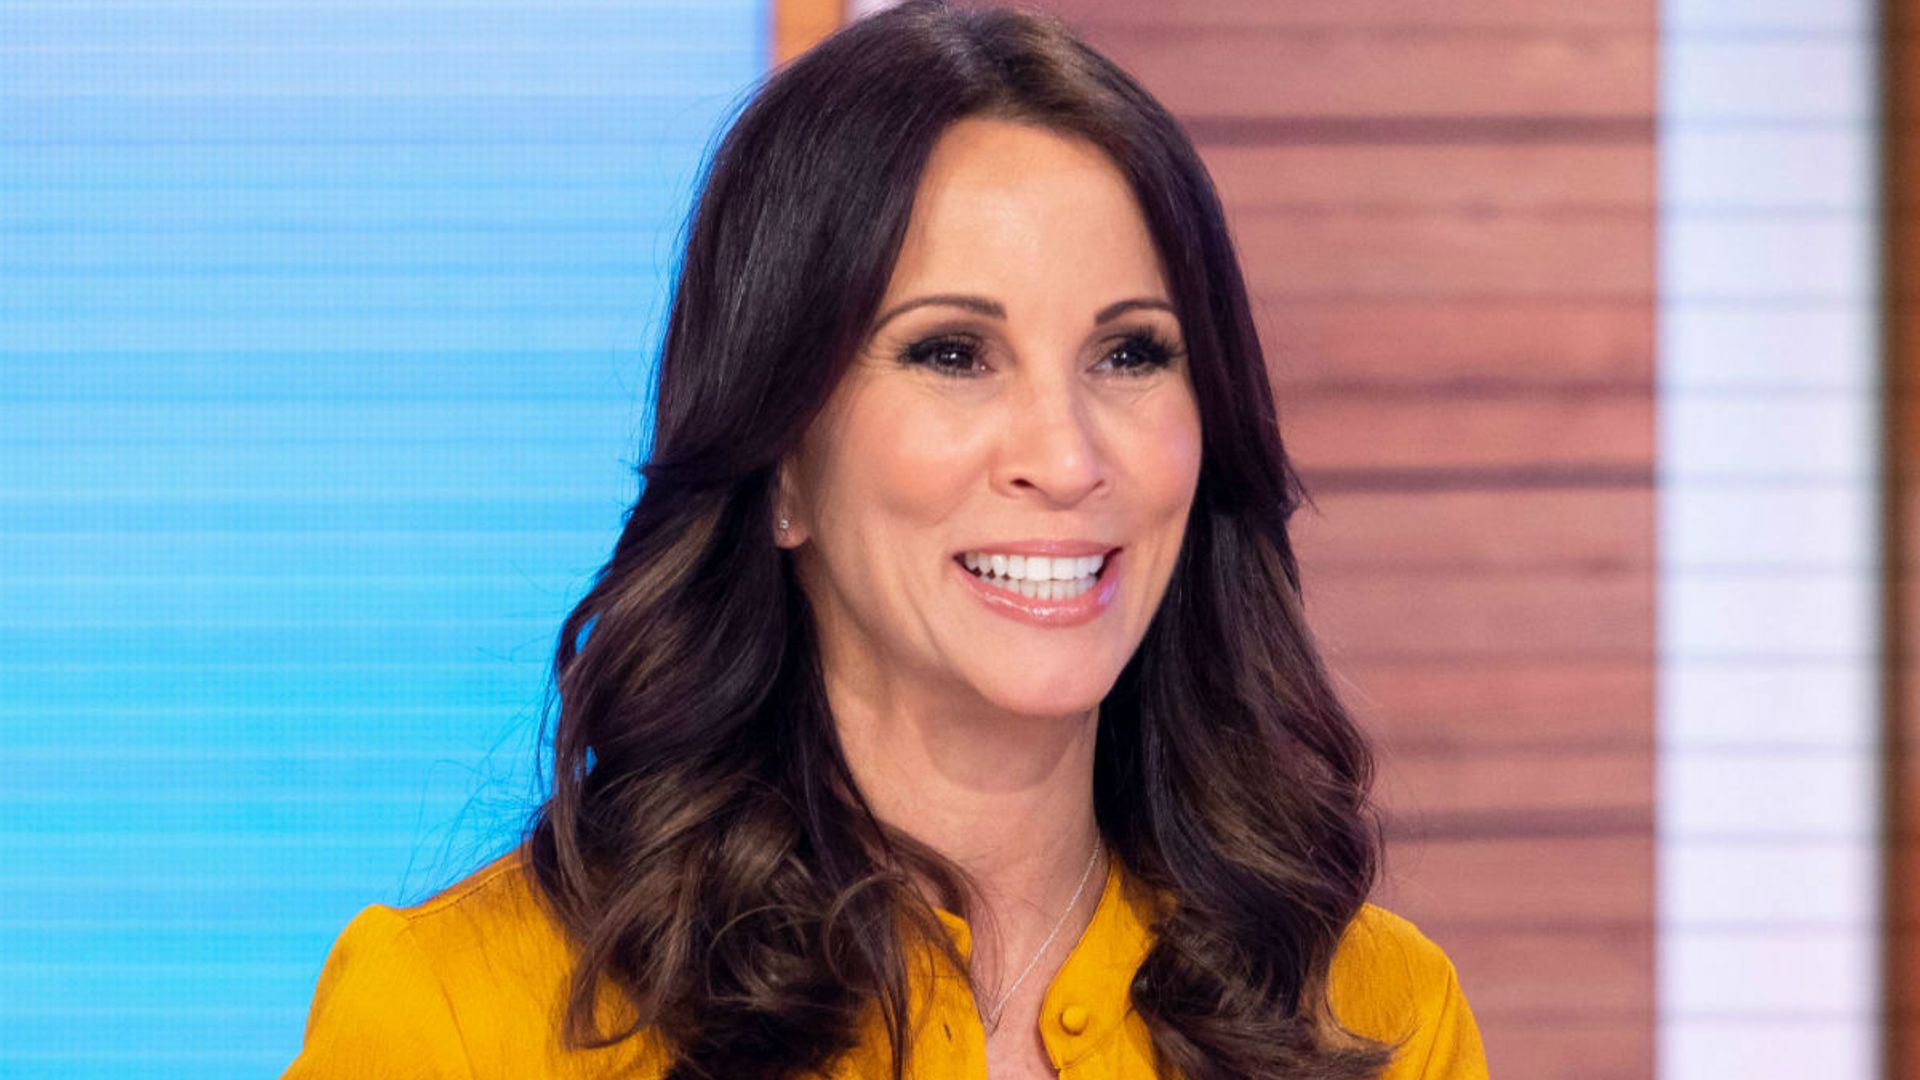 loose women andrea mclean makeover